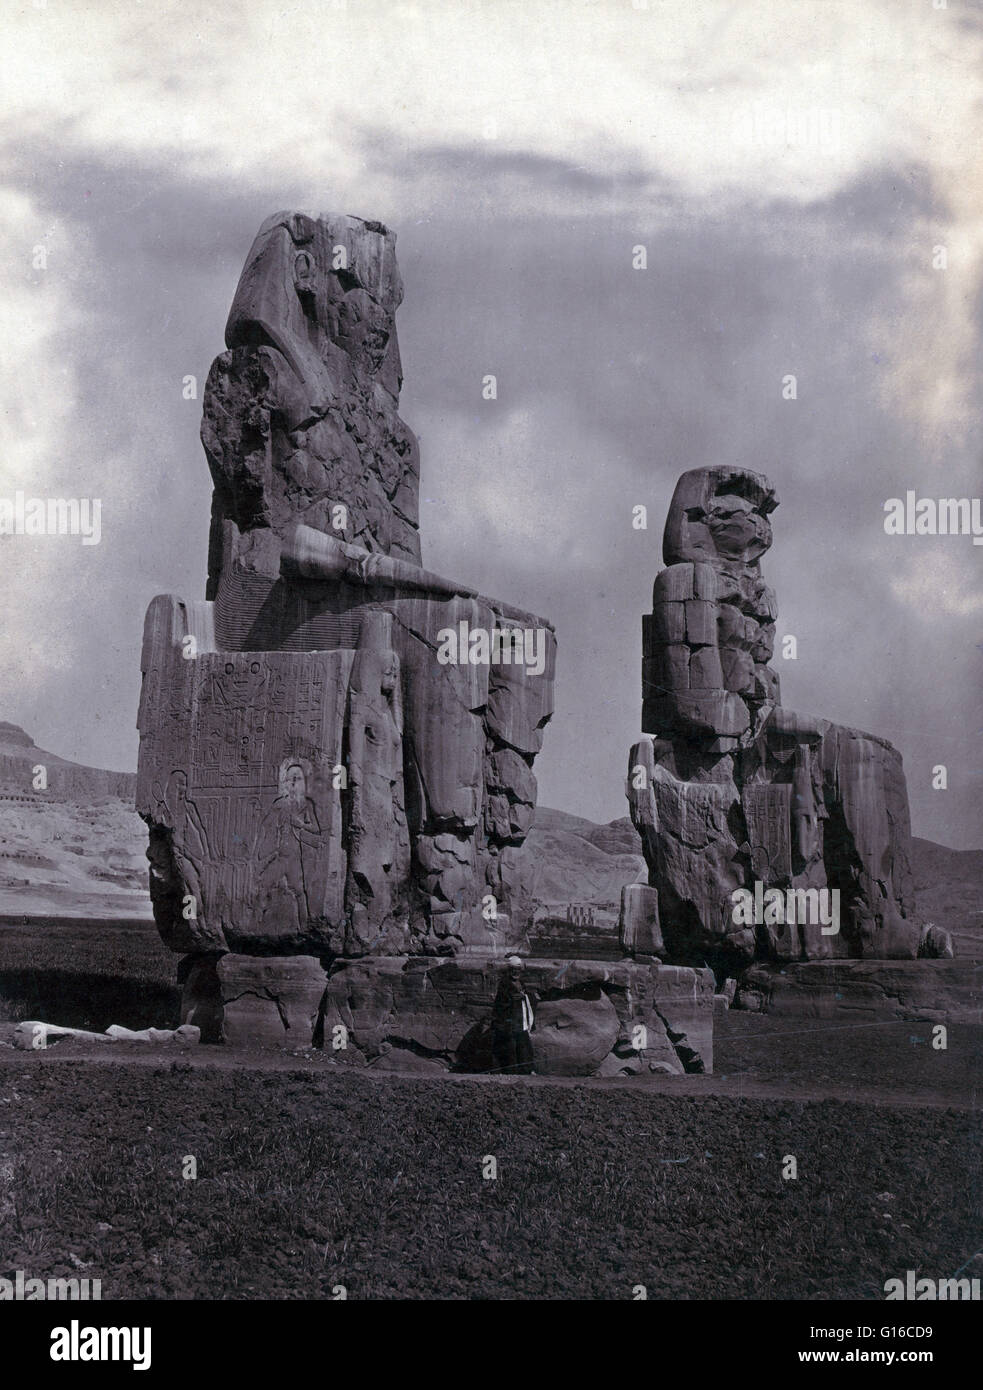 Twin reconstructed statues of Memnon seated on throne, Egypt, photographed by Francis Frith, circa 1856-1860. The Colossi of Memnon are two massive stone statues of Pharaoh Amenhotep III. His reign was a period of unprecedented prosperity and artistic spl Stock Photo